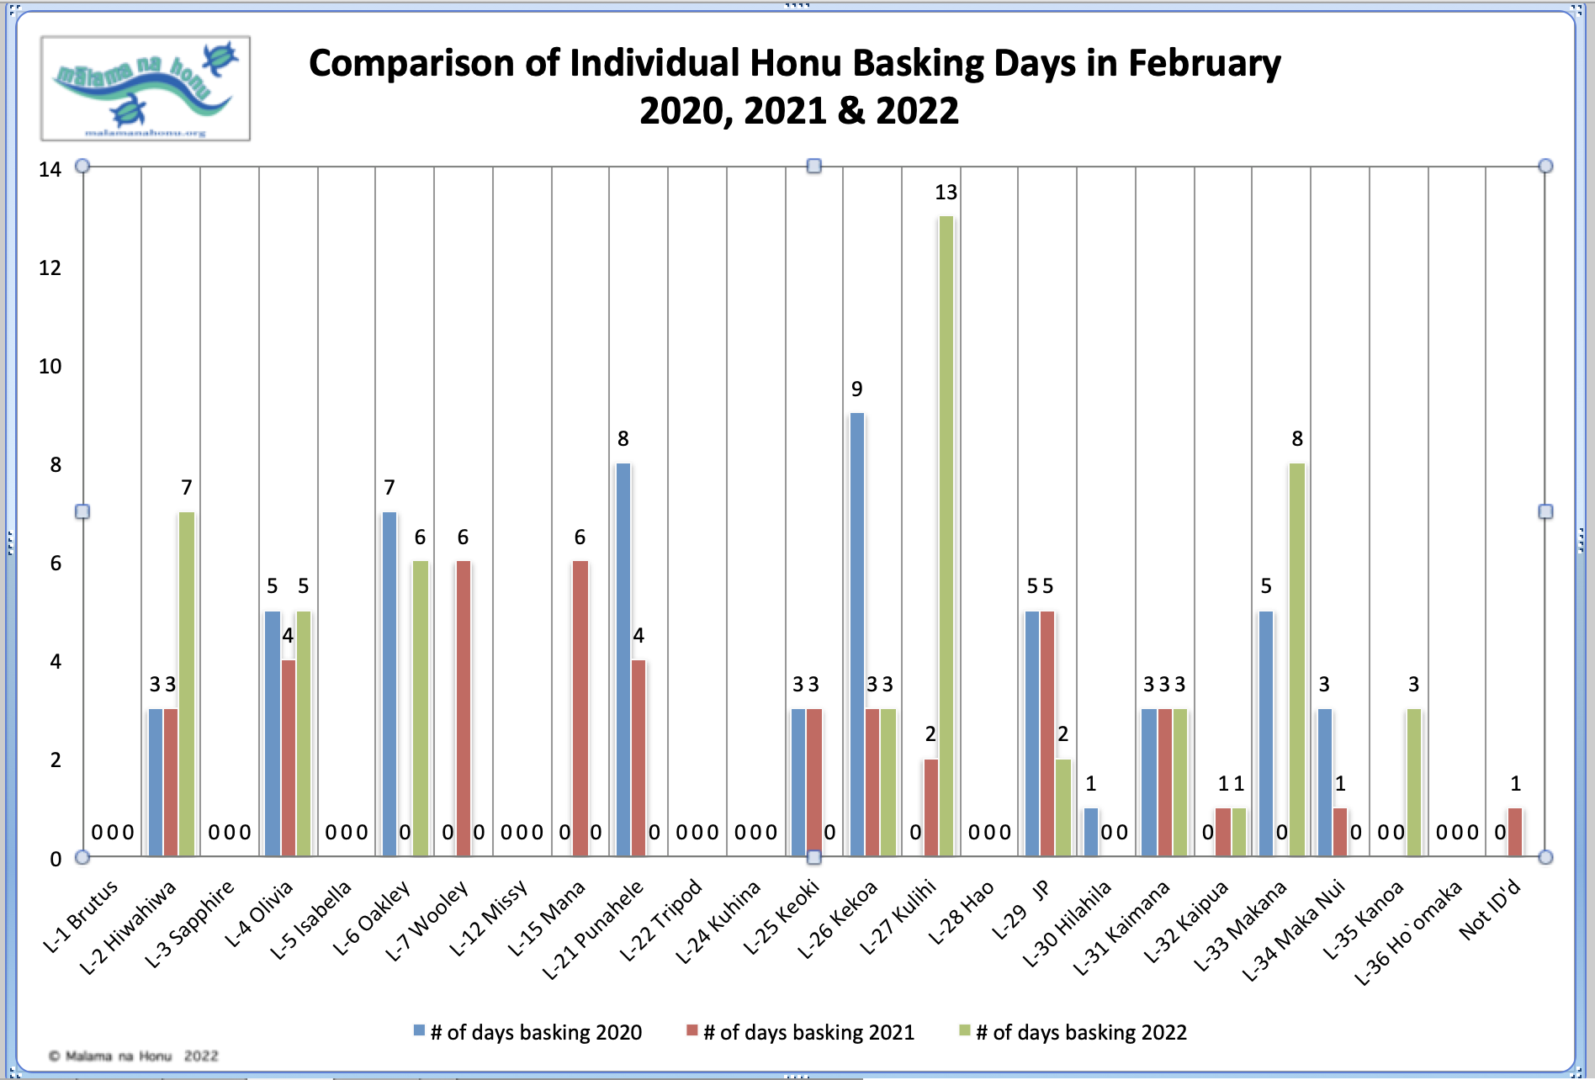 Comparison of Individual Honu Basking Days in February 2020, 2021, and 2022